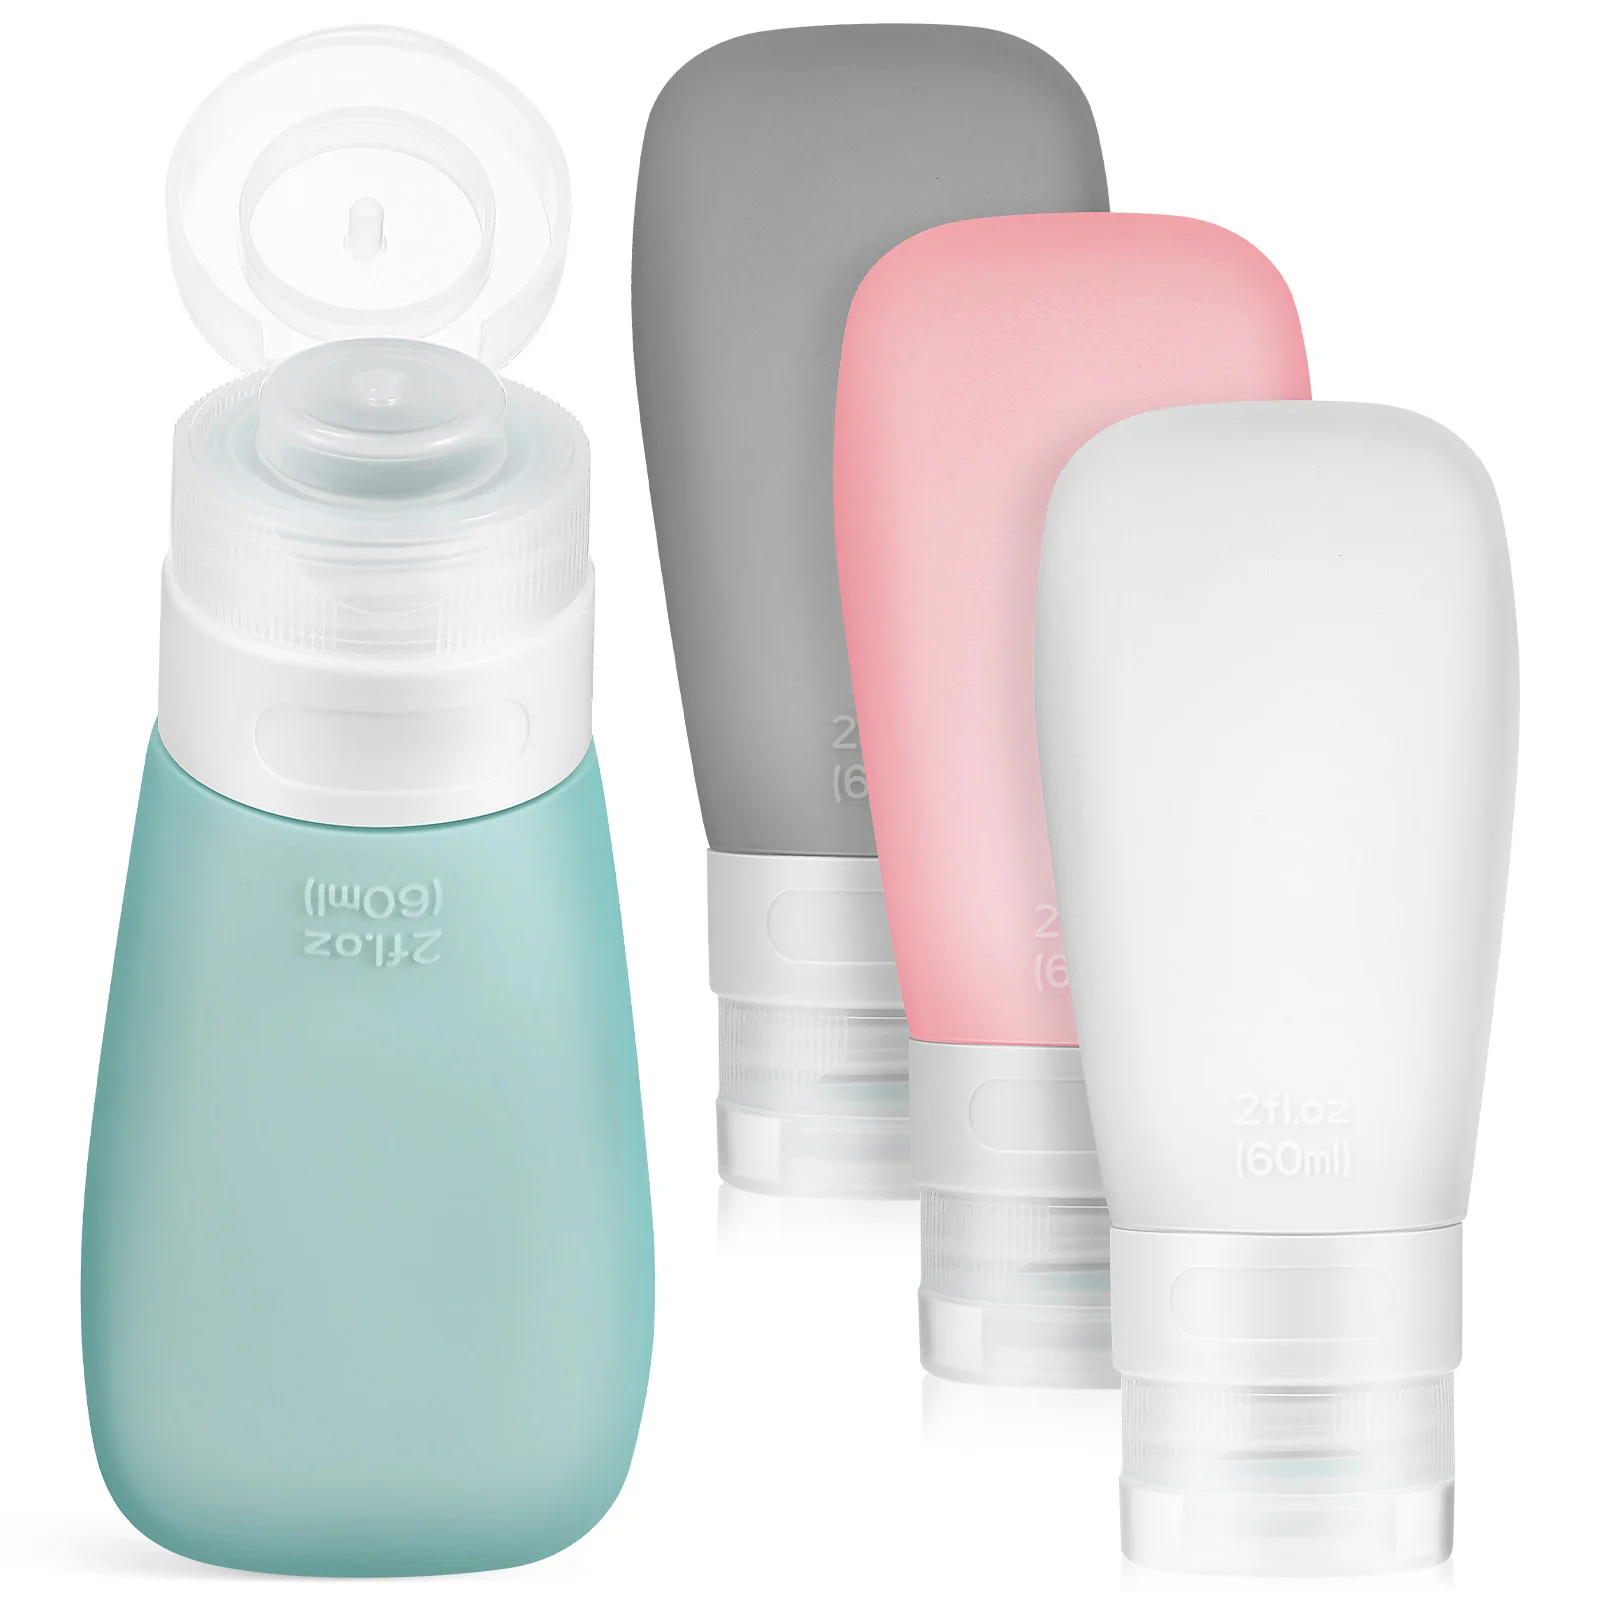 

4 Pcs Travel Bottle Silicone Containers Squeeze Bottles Tubes Sample Silica Gel Empty Toiletries